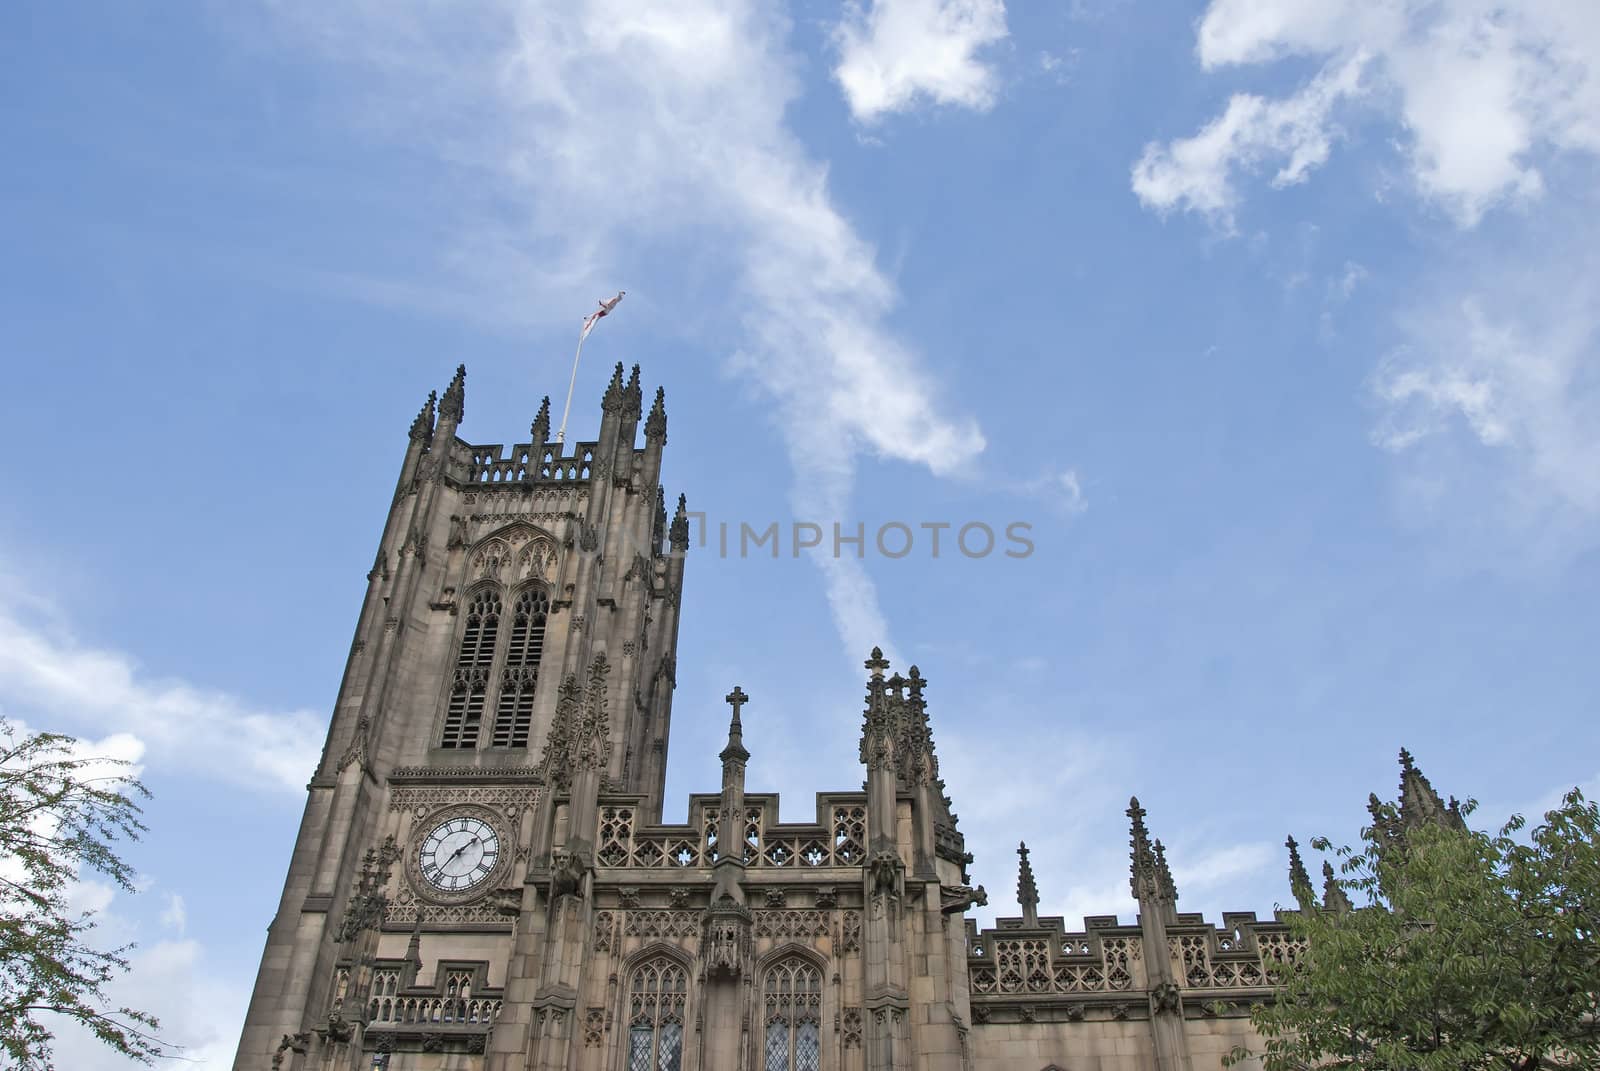 The Clocktower of an English Cathedral